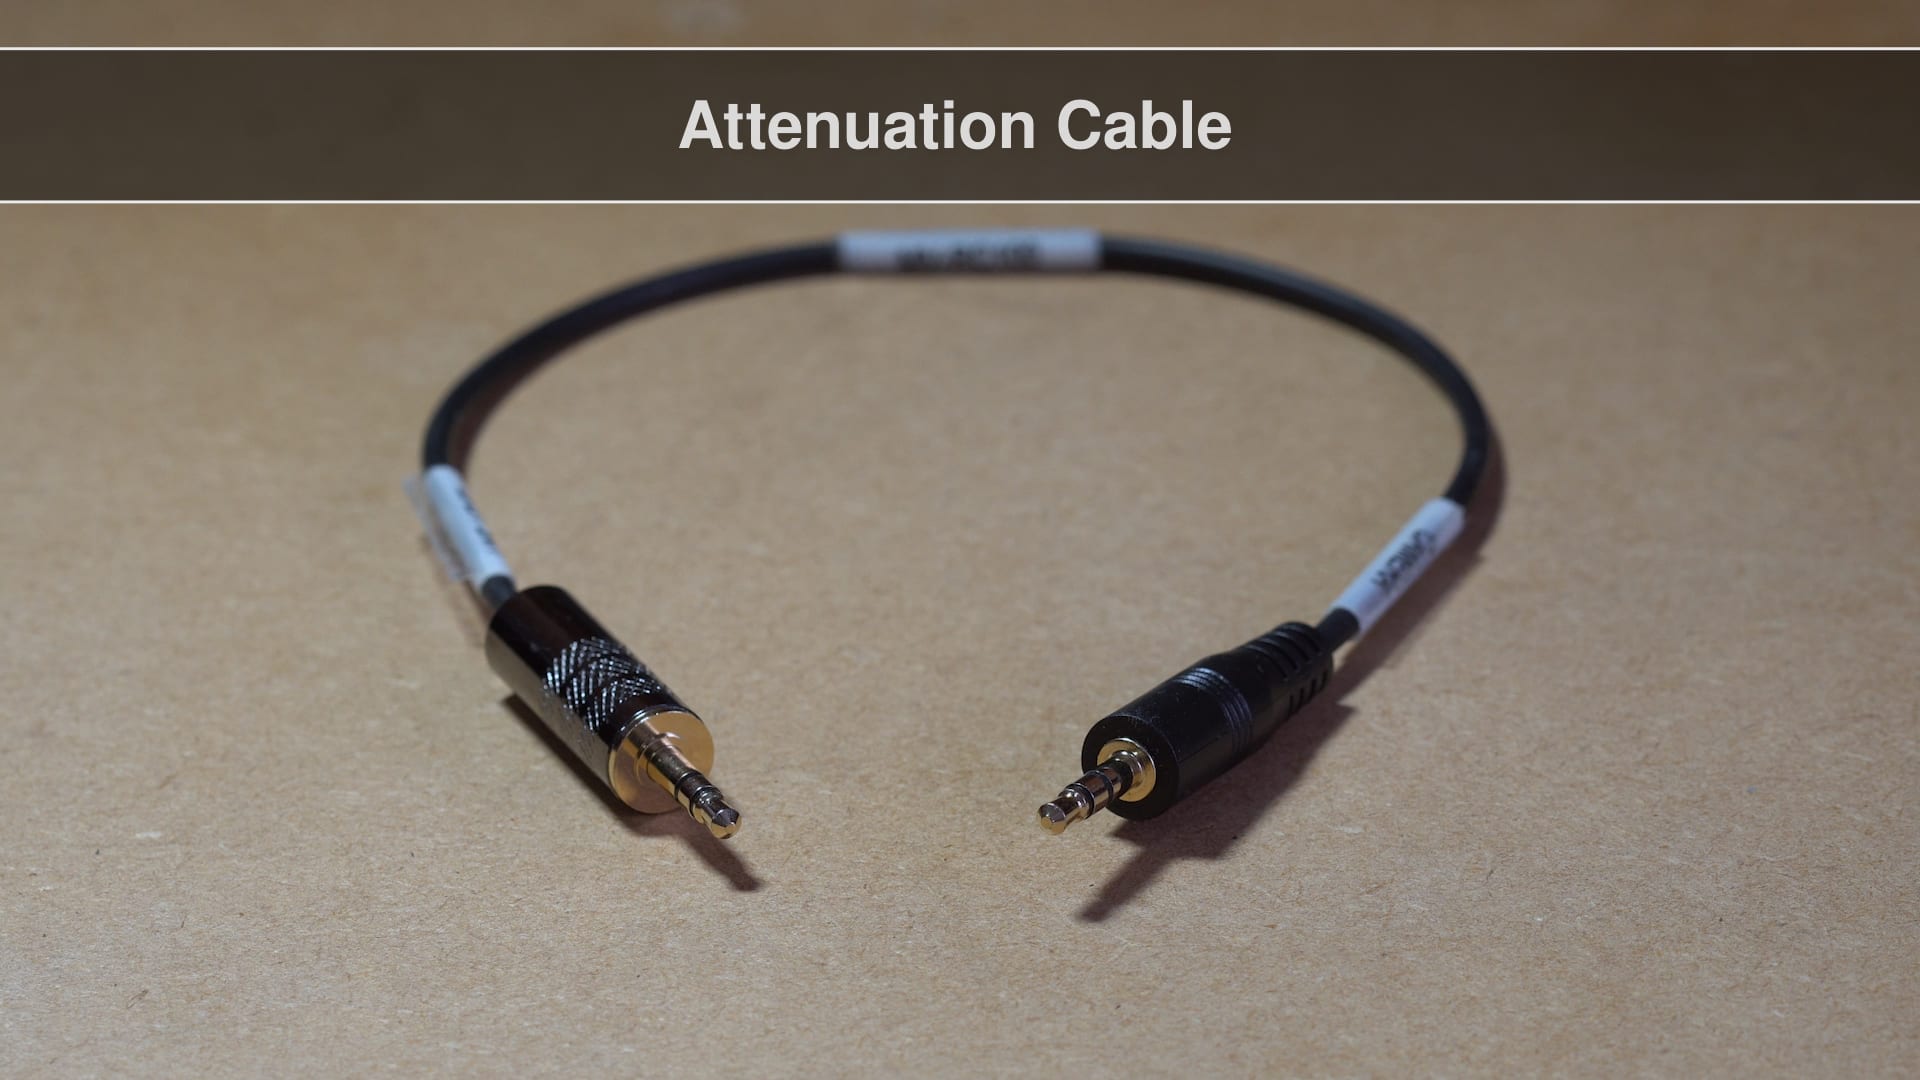 Connect-zoom-h1-to-mixer-attenuation-cable